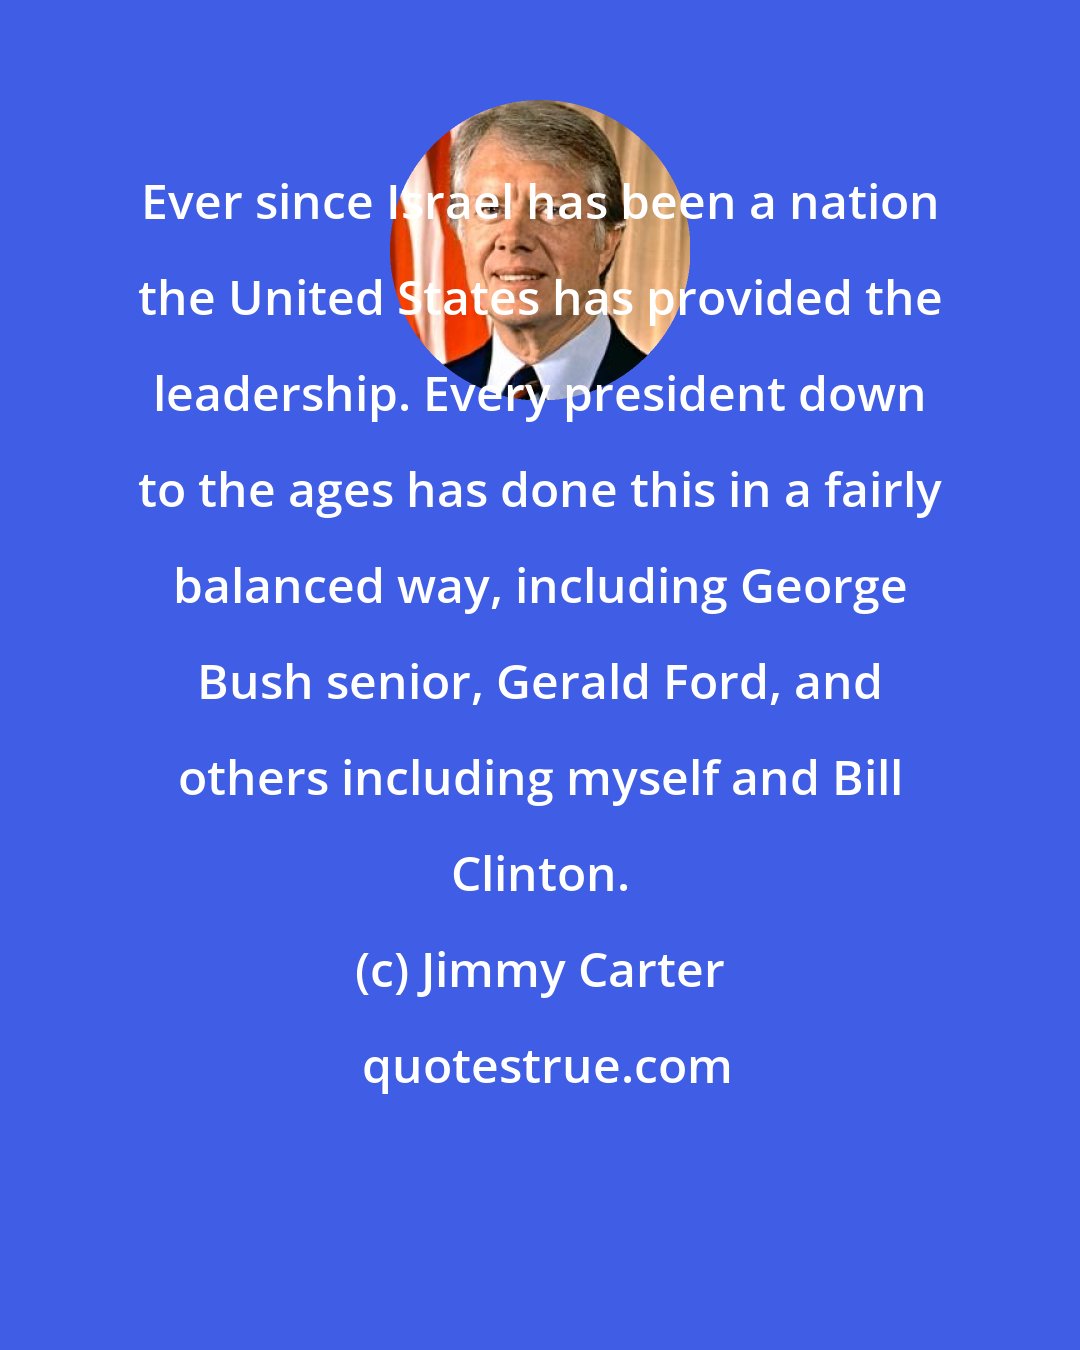 Jimmy Carter: Ever since Israel has been a nation the United States has provided the leadership. Every president down to the ages has done this in a fairly balanced way, including George Bush senior, Gerald Ford, and others including myself and Bill Clinton.